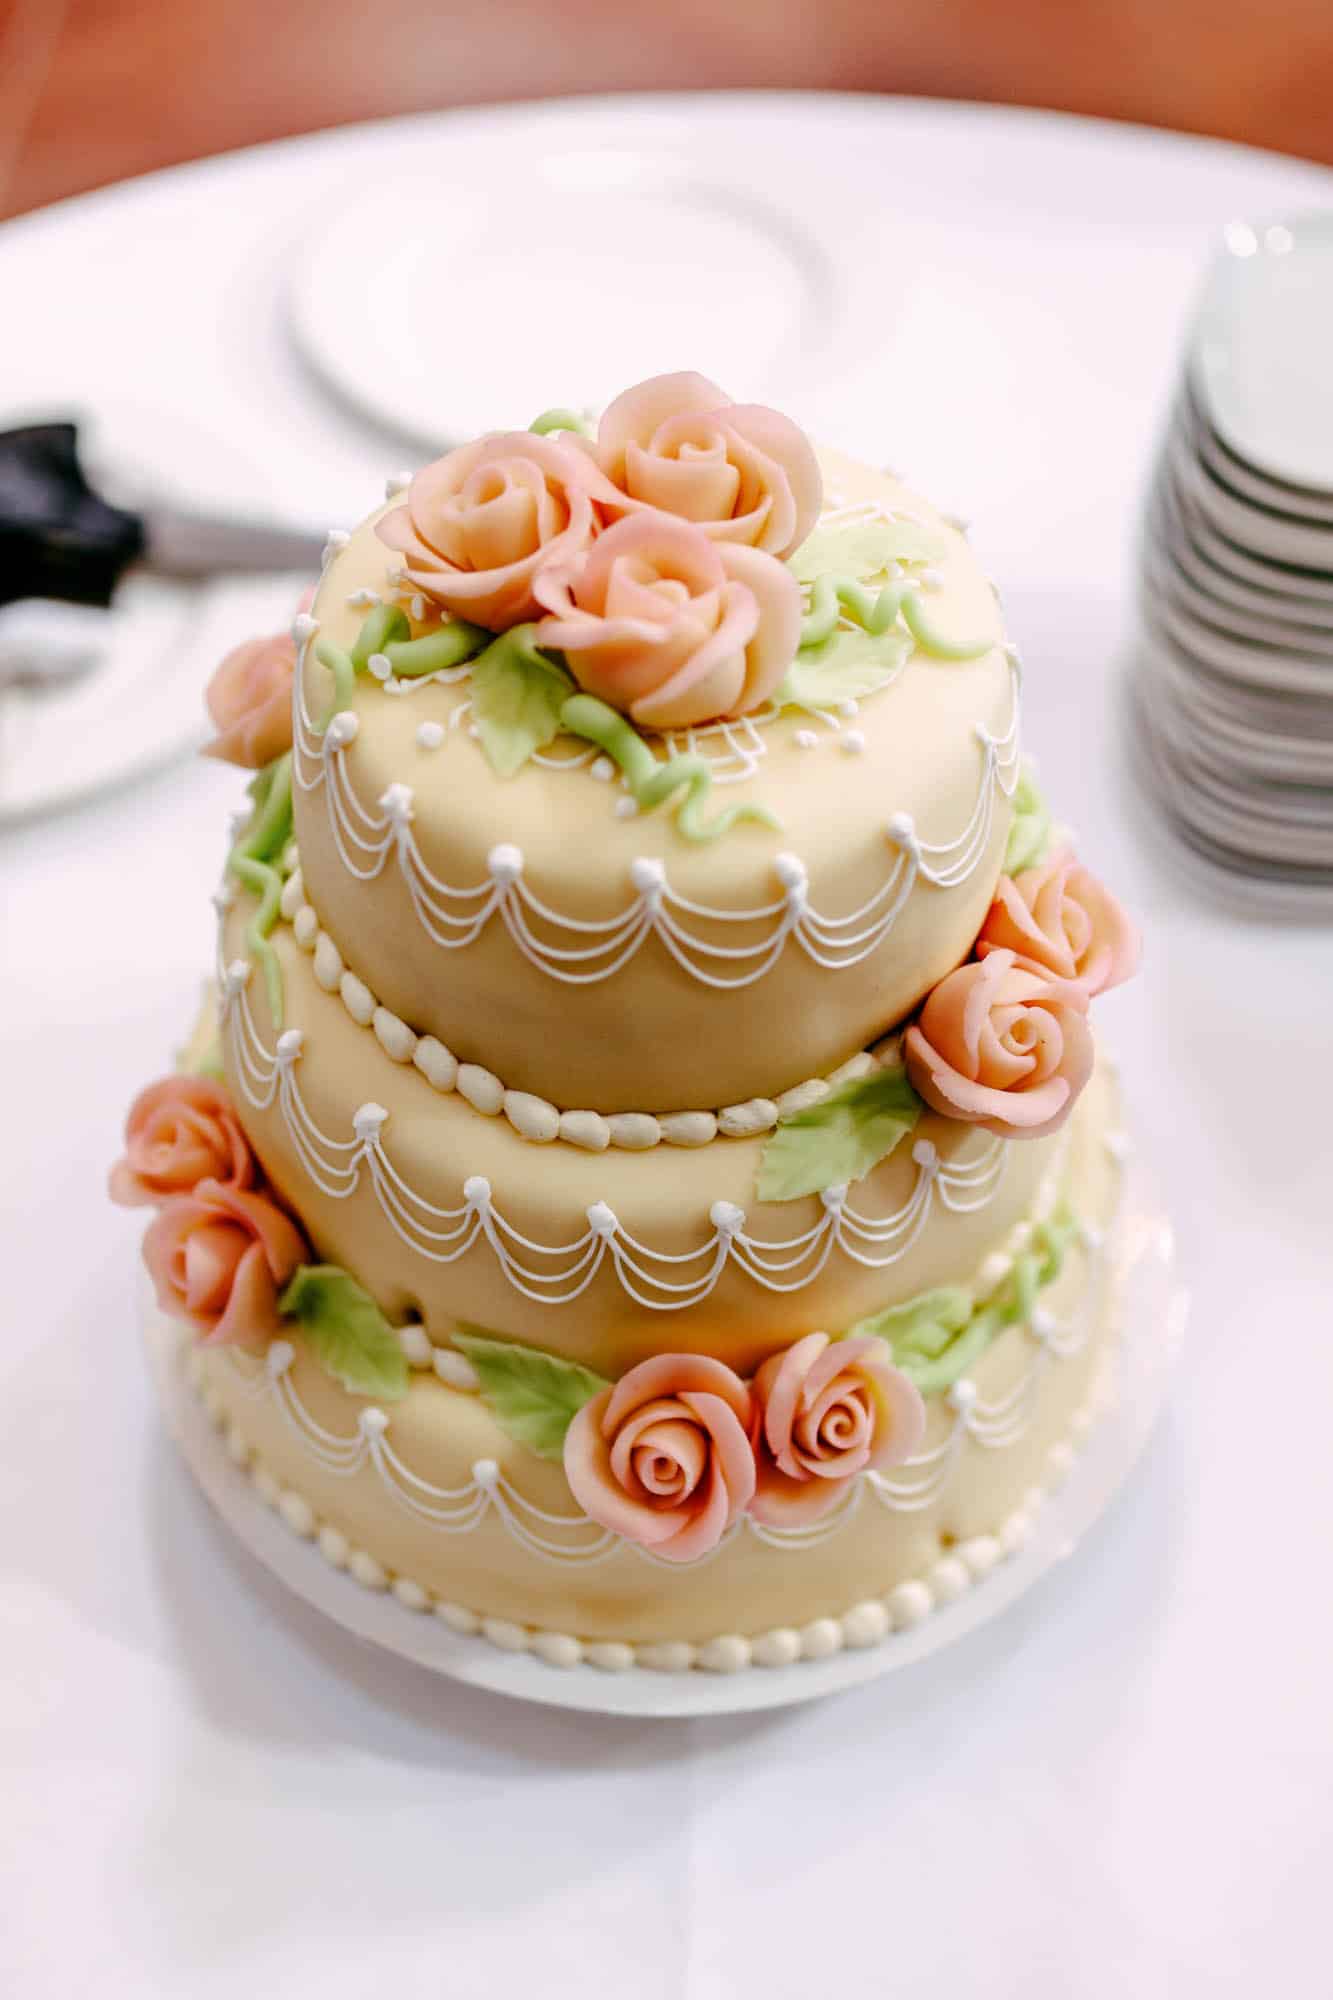 A beautifully decorated wedding cake on the table, exuding elegance and decadence for an unforgettable wedding celebration.